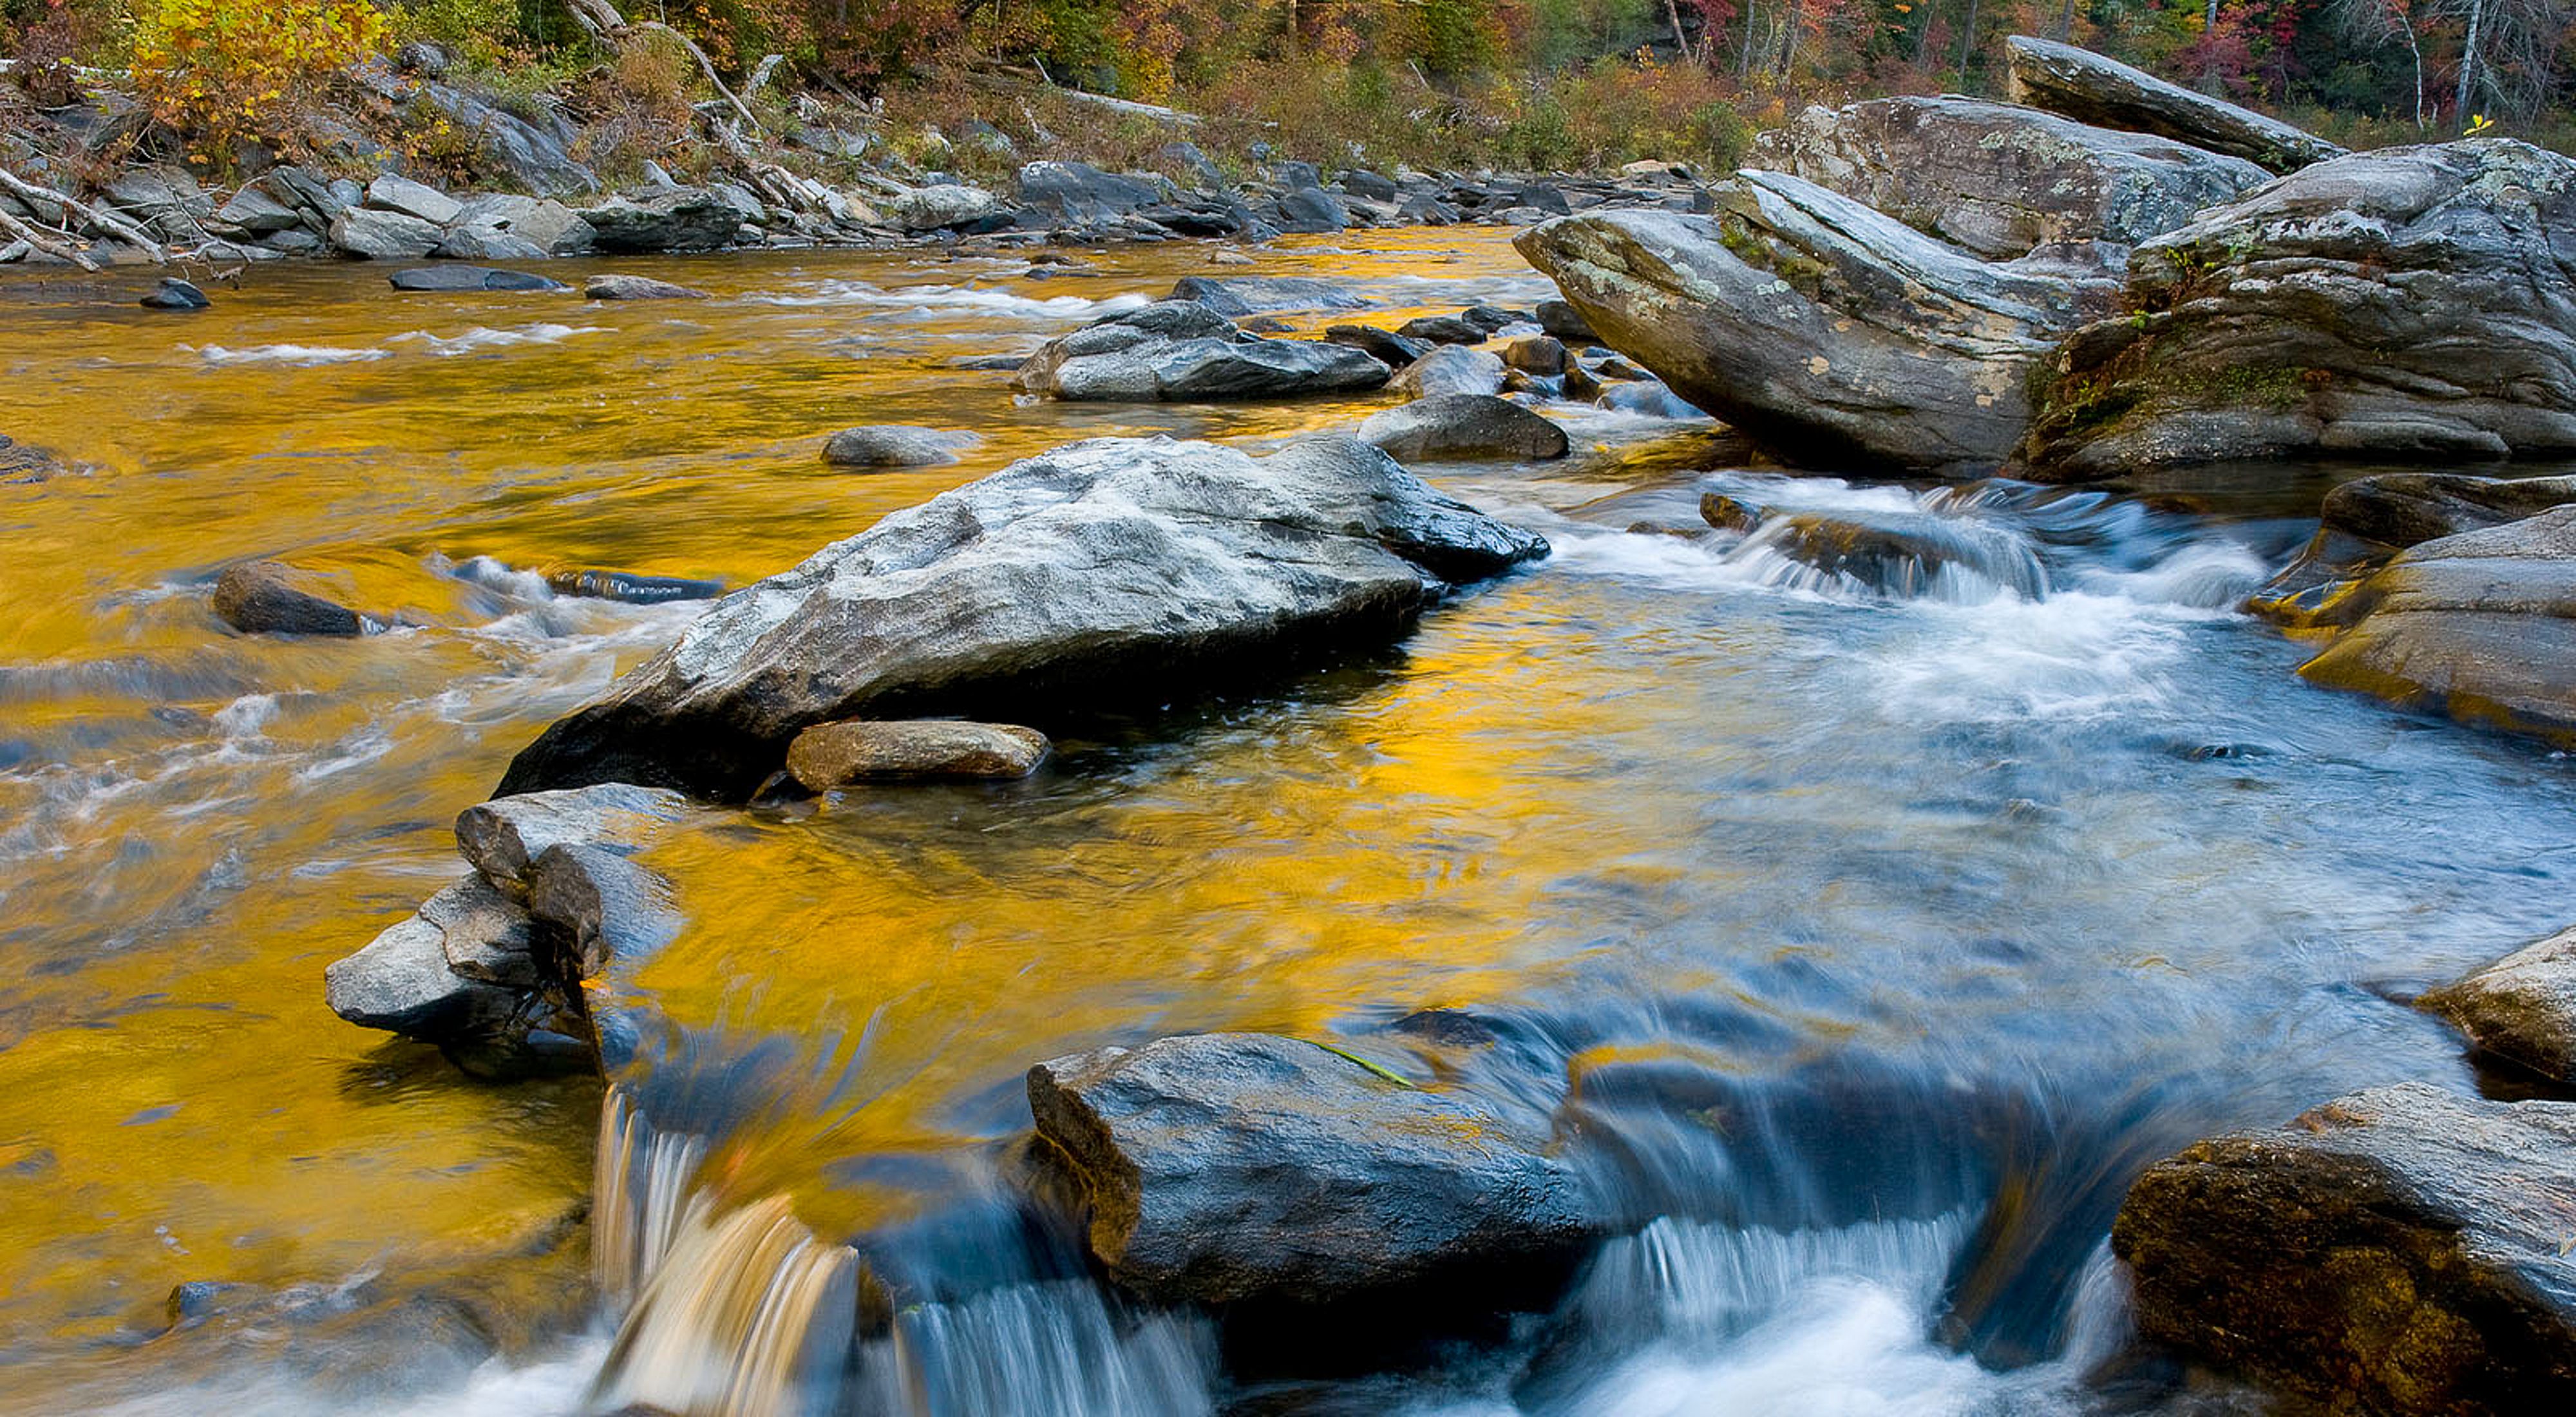 Water flows through a tributary in the Appalachian Mountains of Georgia.